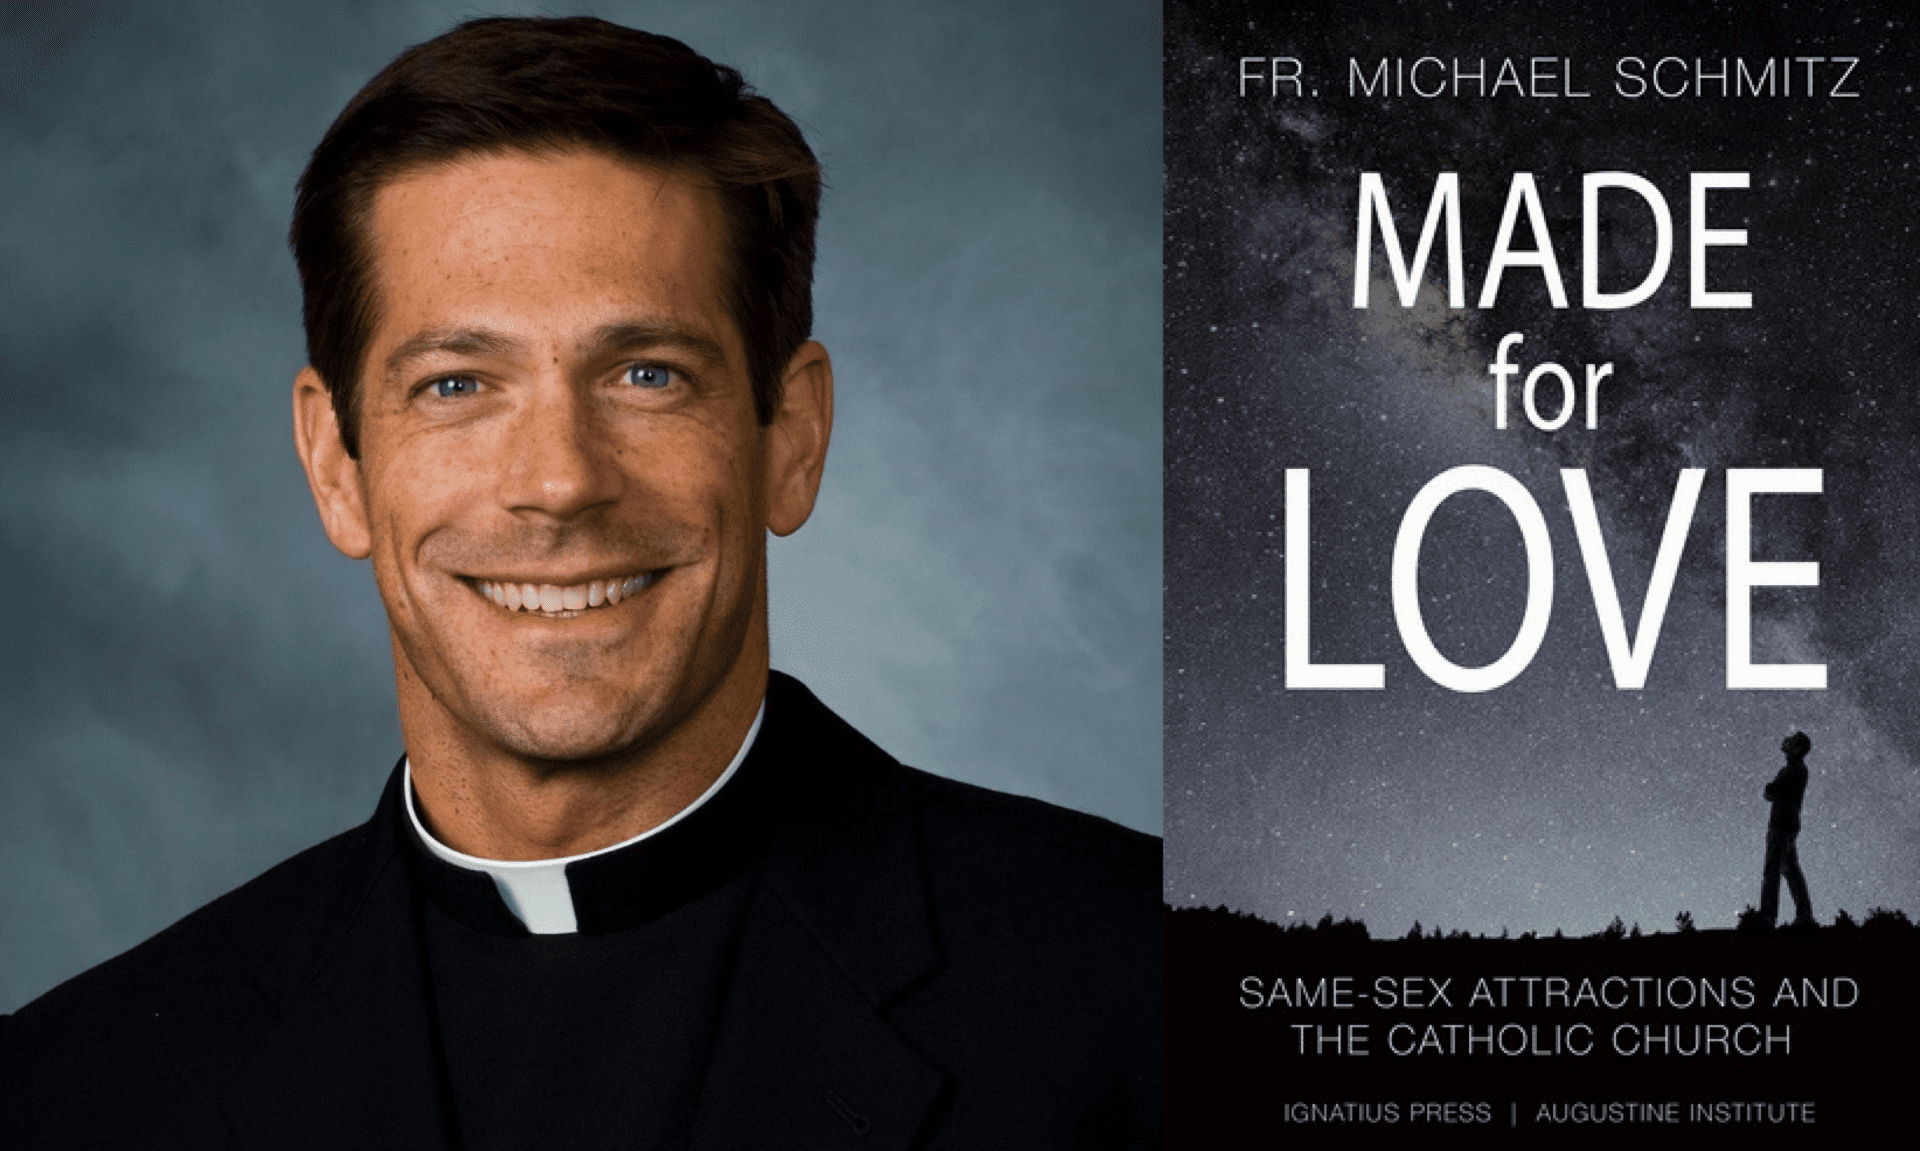 Mike Schmitz on new book for young Catholics with same-sex attraction - Tru...